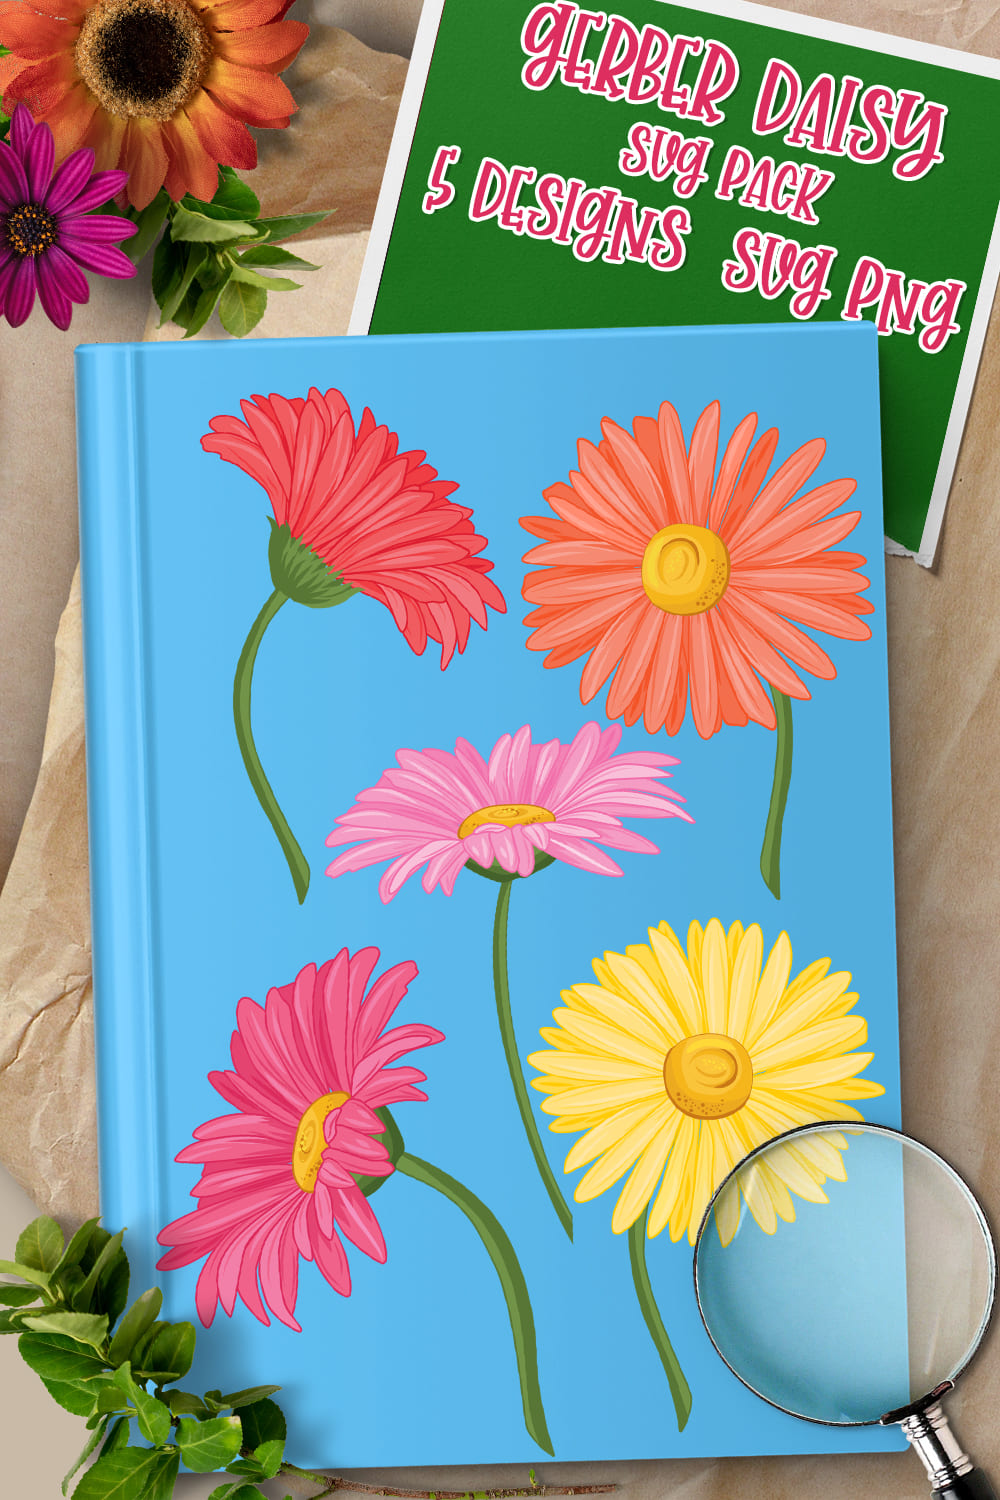 Colorful gerber daisy on a blue cover.